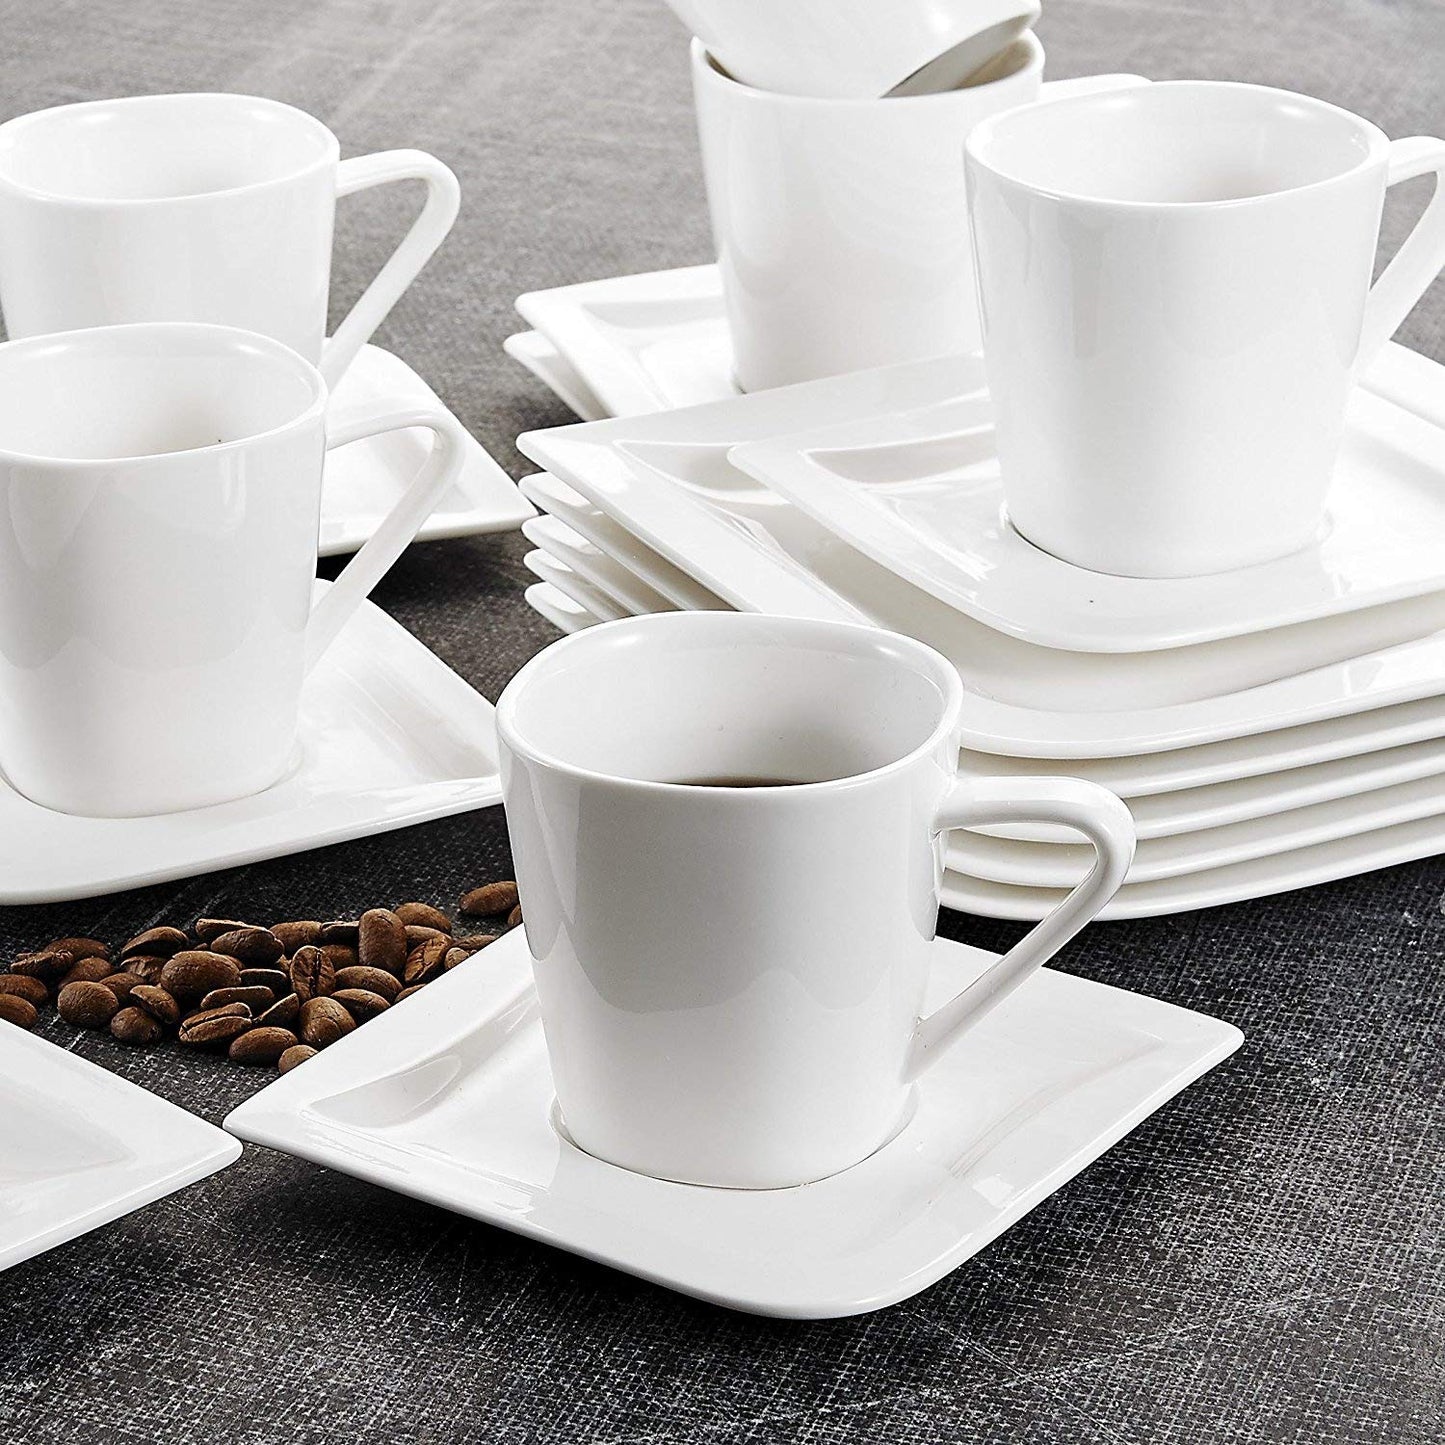 Joesfa 18-Piece Porcelain China Ceramic Tea Coffee Cups&Saucers Sets with 6-Piece Cups,Saucers and Dessert Plates - Nordic Side - 18, and, Ceramic, China, Coffee, CupsSaucers, Dessert, Joesfa